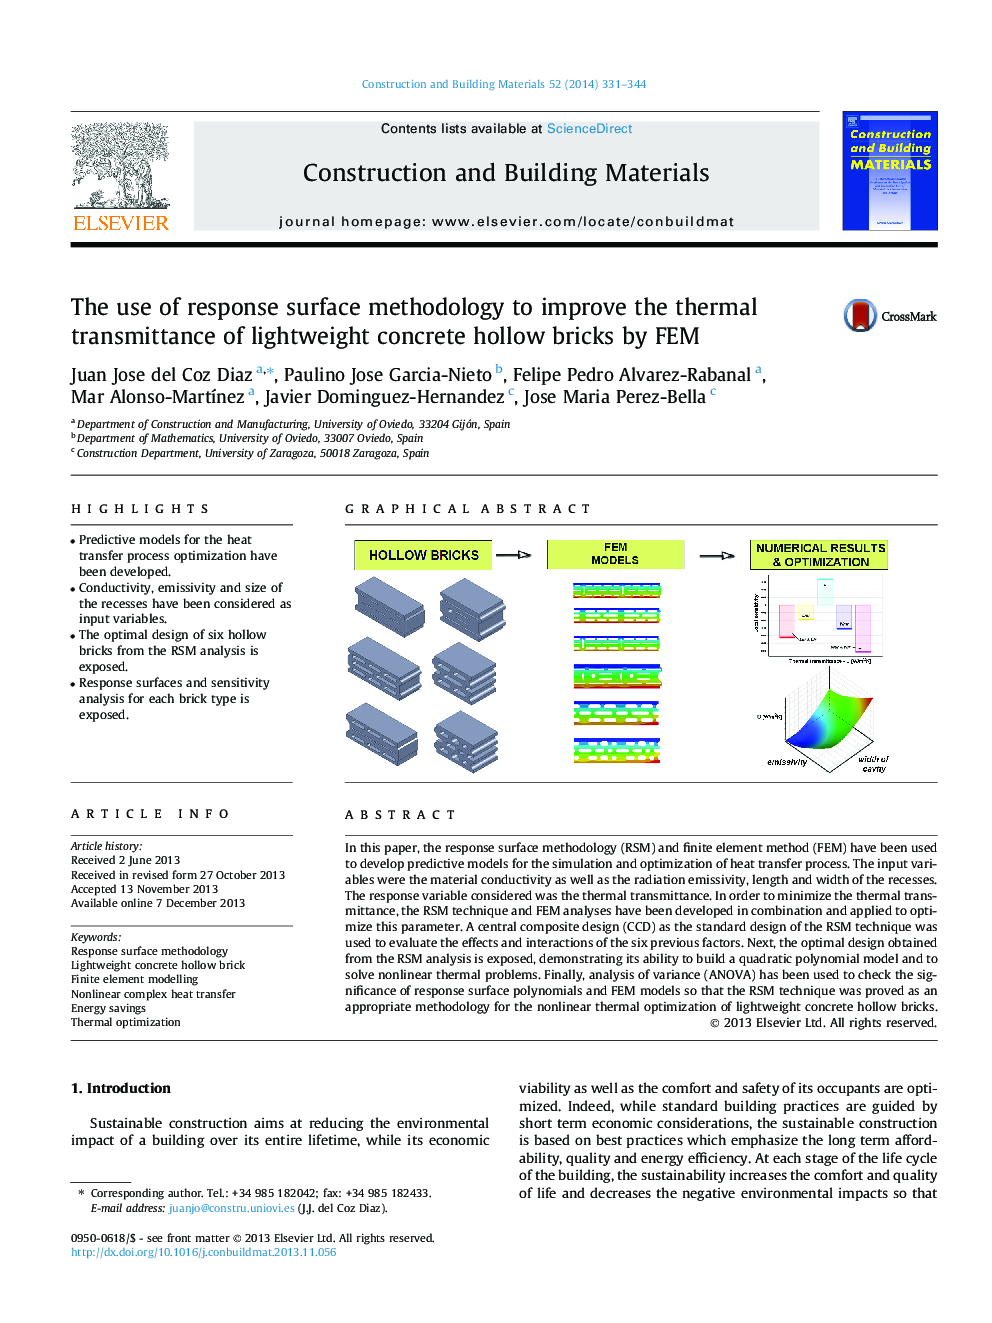 The use of response surface methodology to improve the thermal transmittance of lightweight concrete hollow bricks by FEM